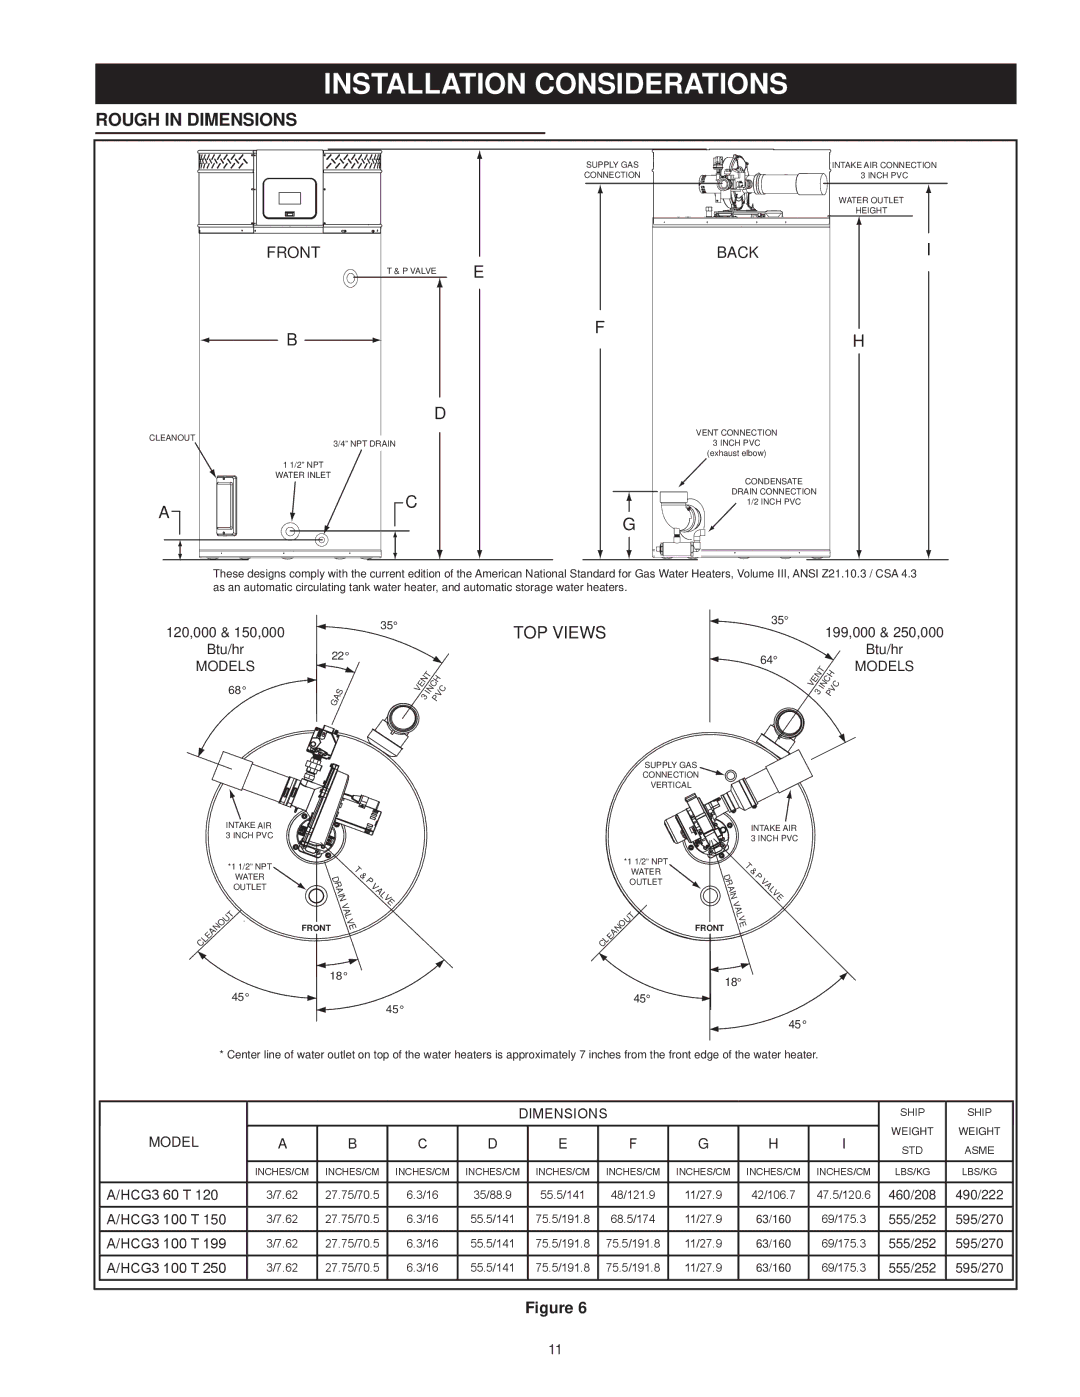 American Water Heater Commercial Gas Water Heaters Installation Considerations, Rough in Dimensions, TOP Views, Front 